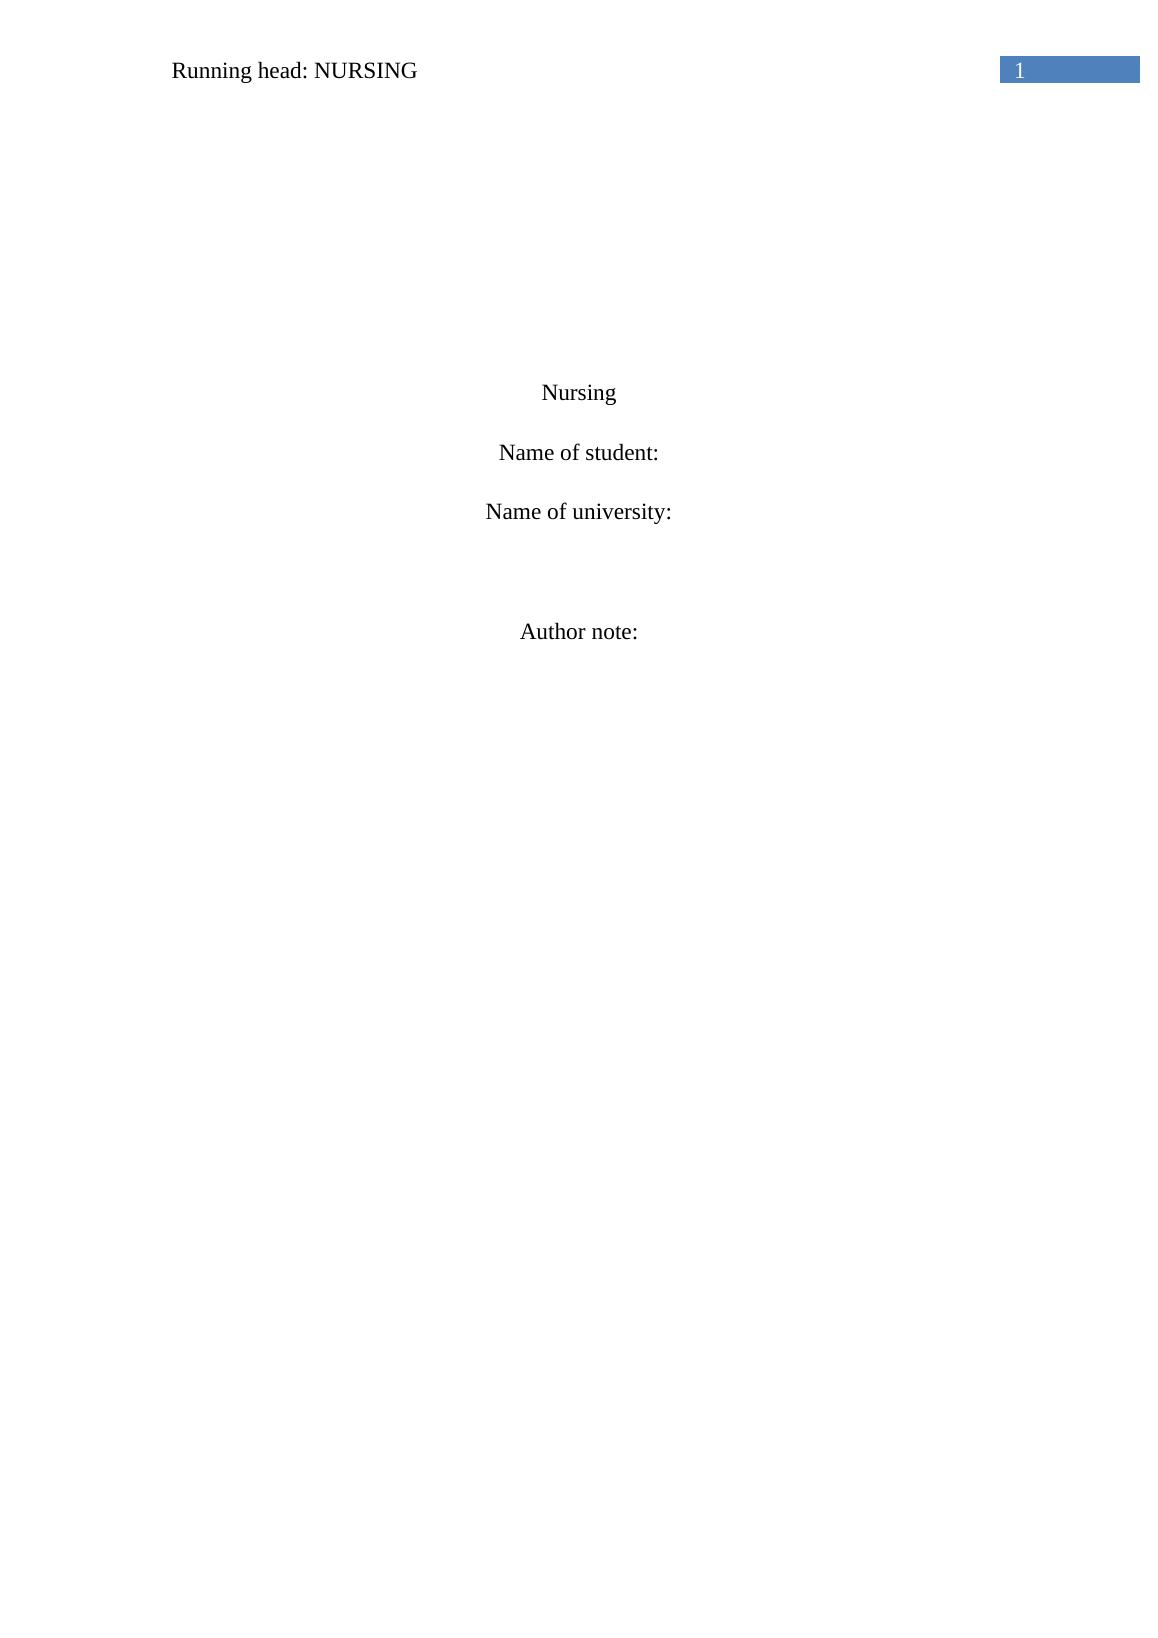 Report on Research Article Relevant to Nursing Practice_1